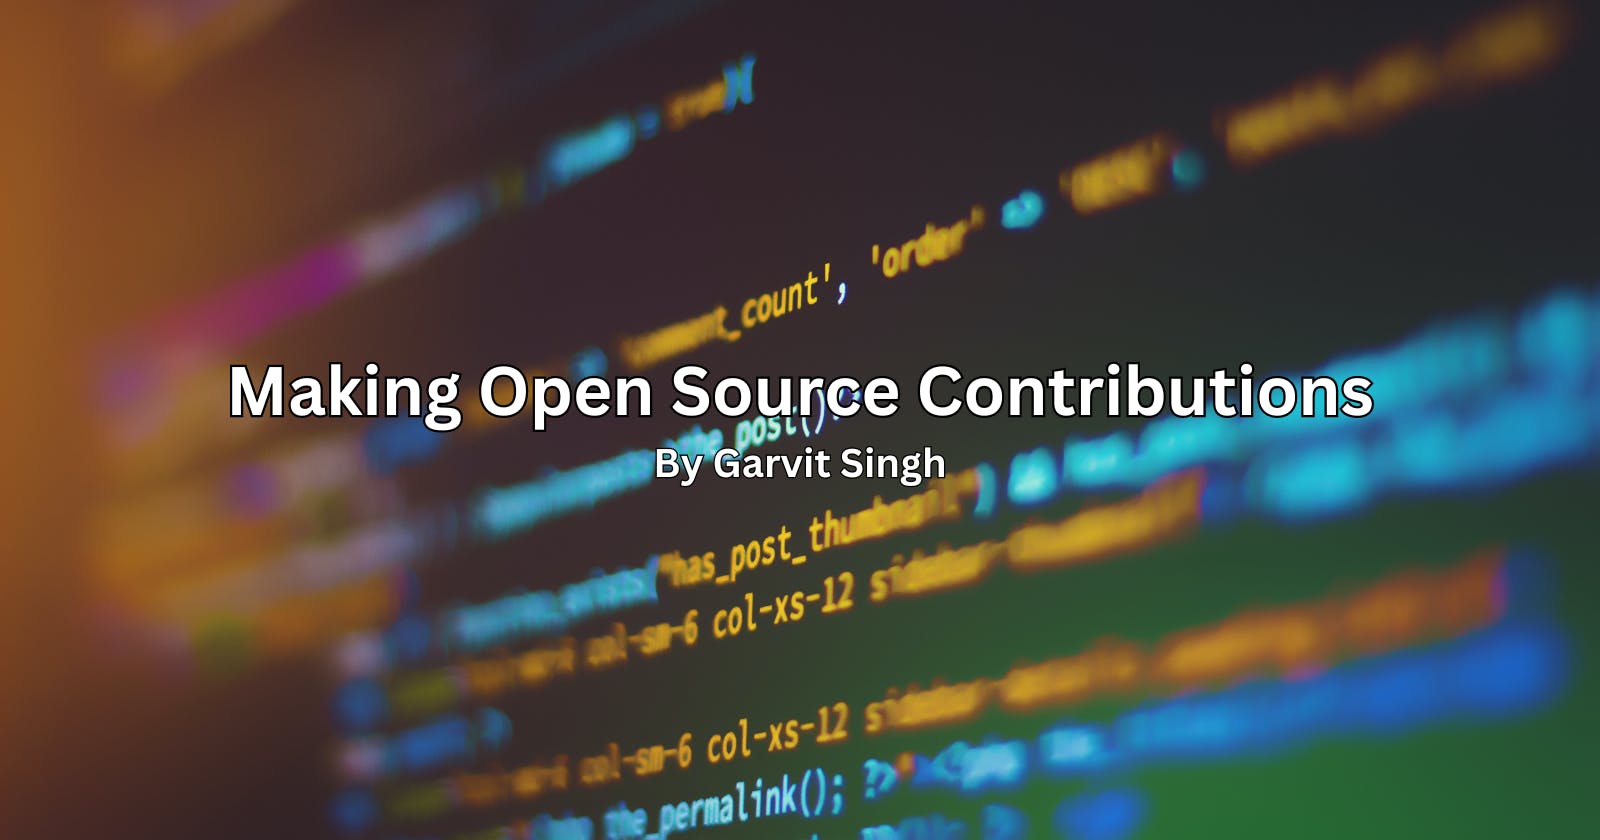 Make Open Source Contributions